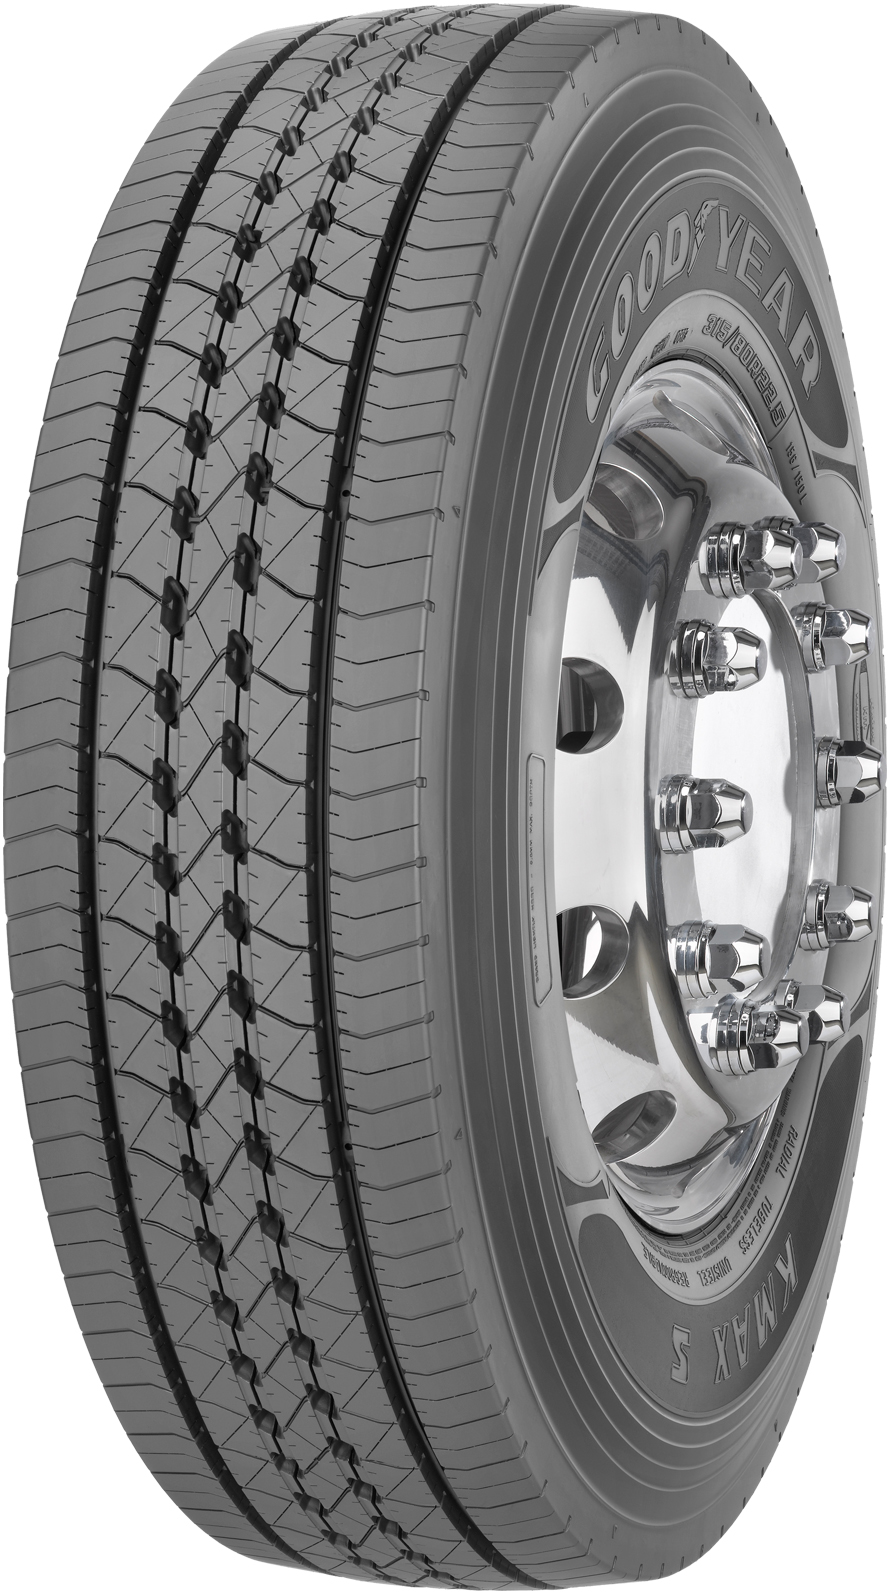 product_type-heavy_tires GOODYEAR KMAX S 16 TL 285/70 R19.5 146L